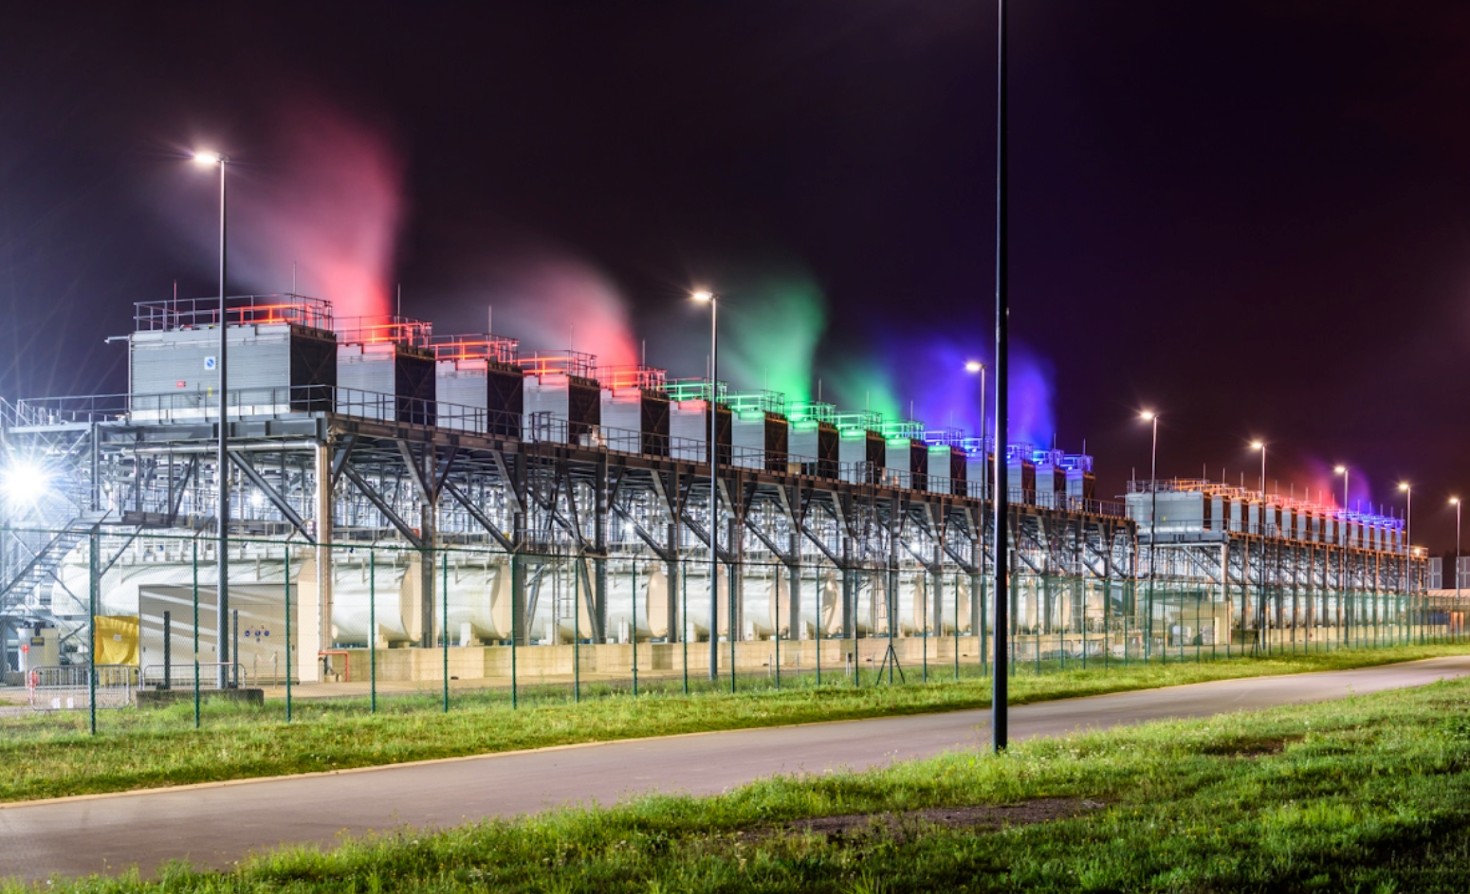 Steam rises from cooling towers at Google data centers in the Walloon region of Belgium.